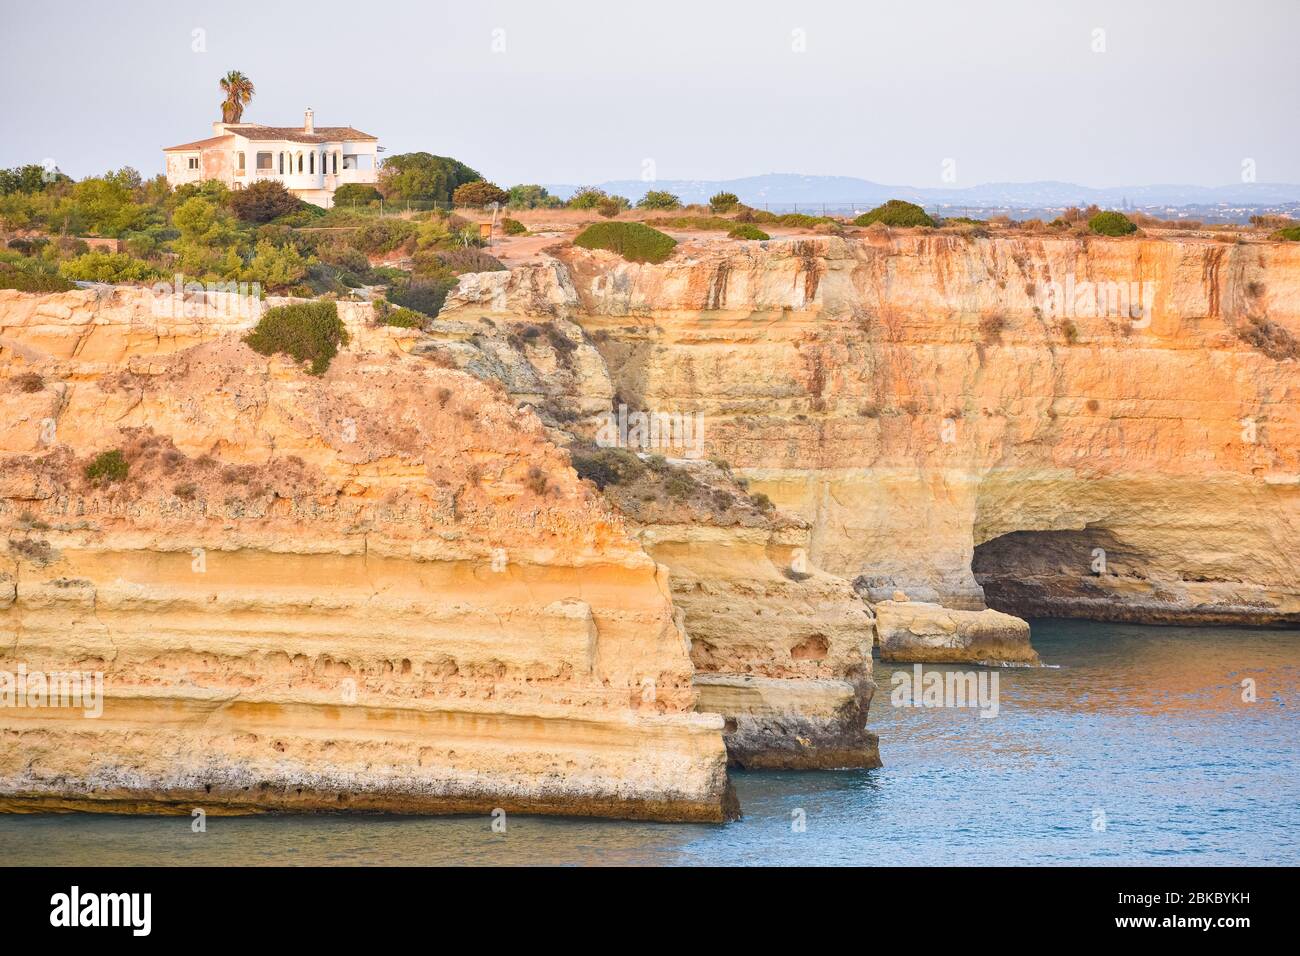 Small summer house on top of the cliffs, overlooking the sea. Algarve, Portugal Stock Photo